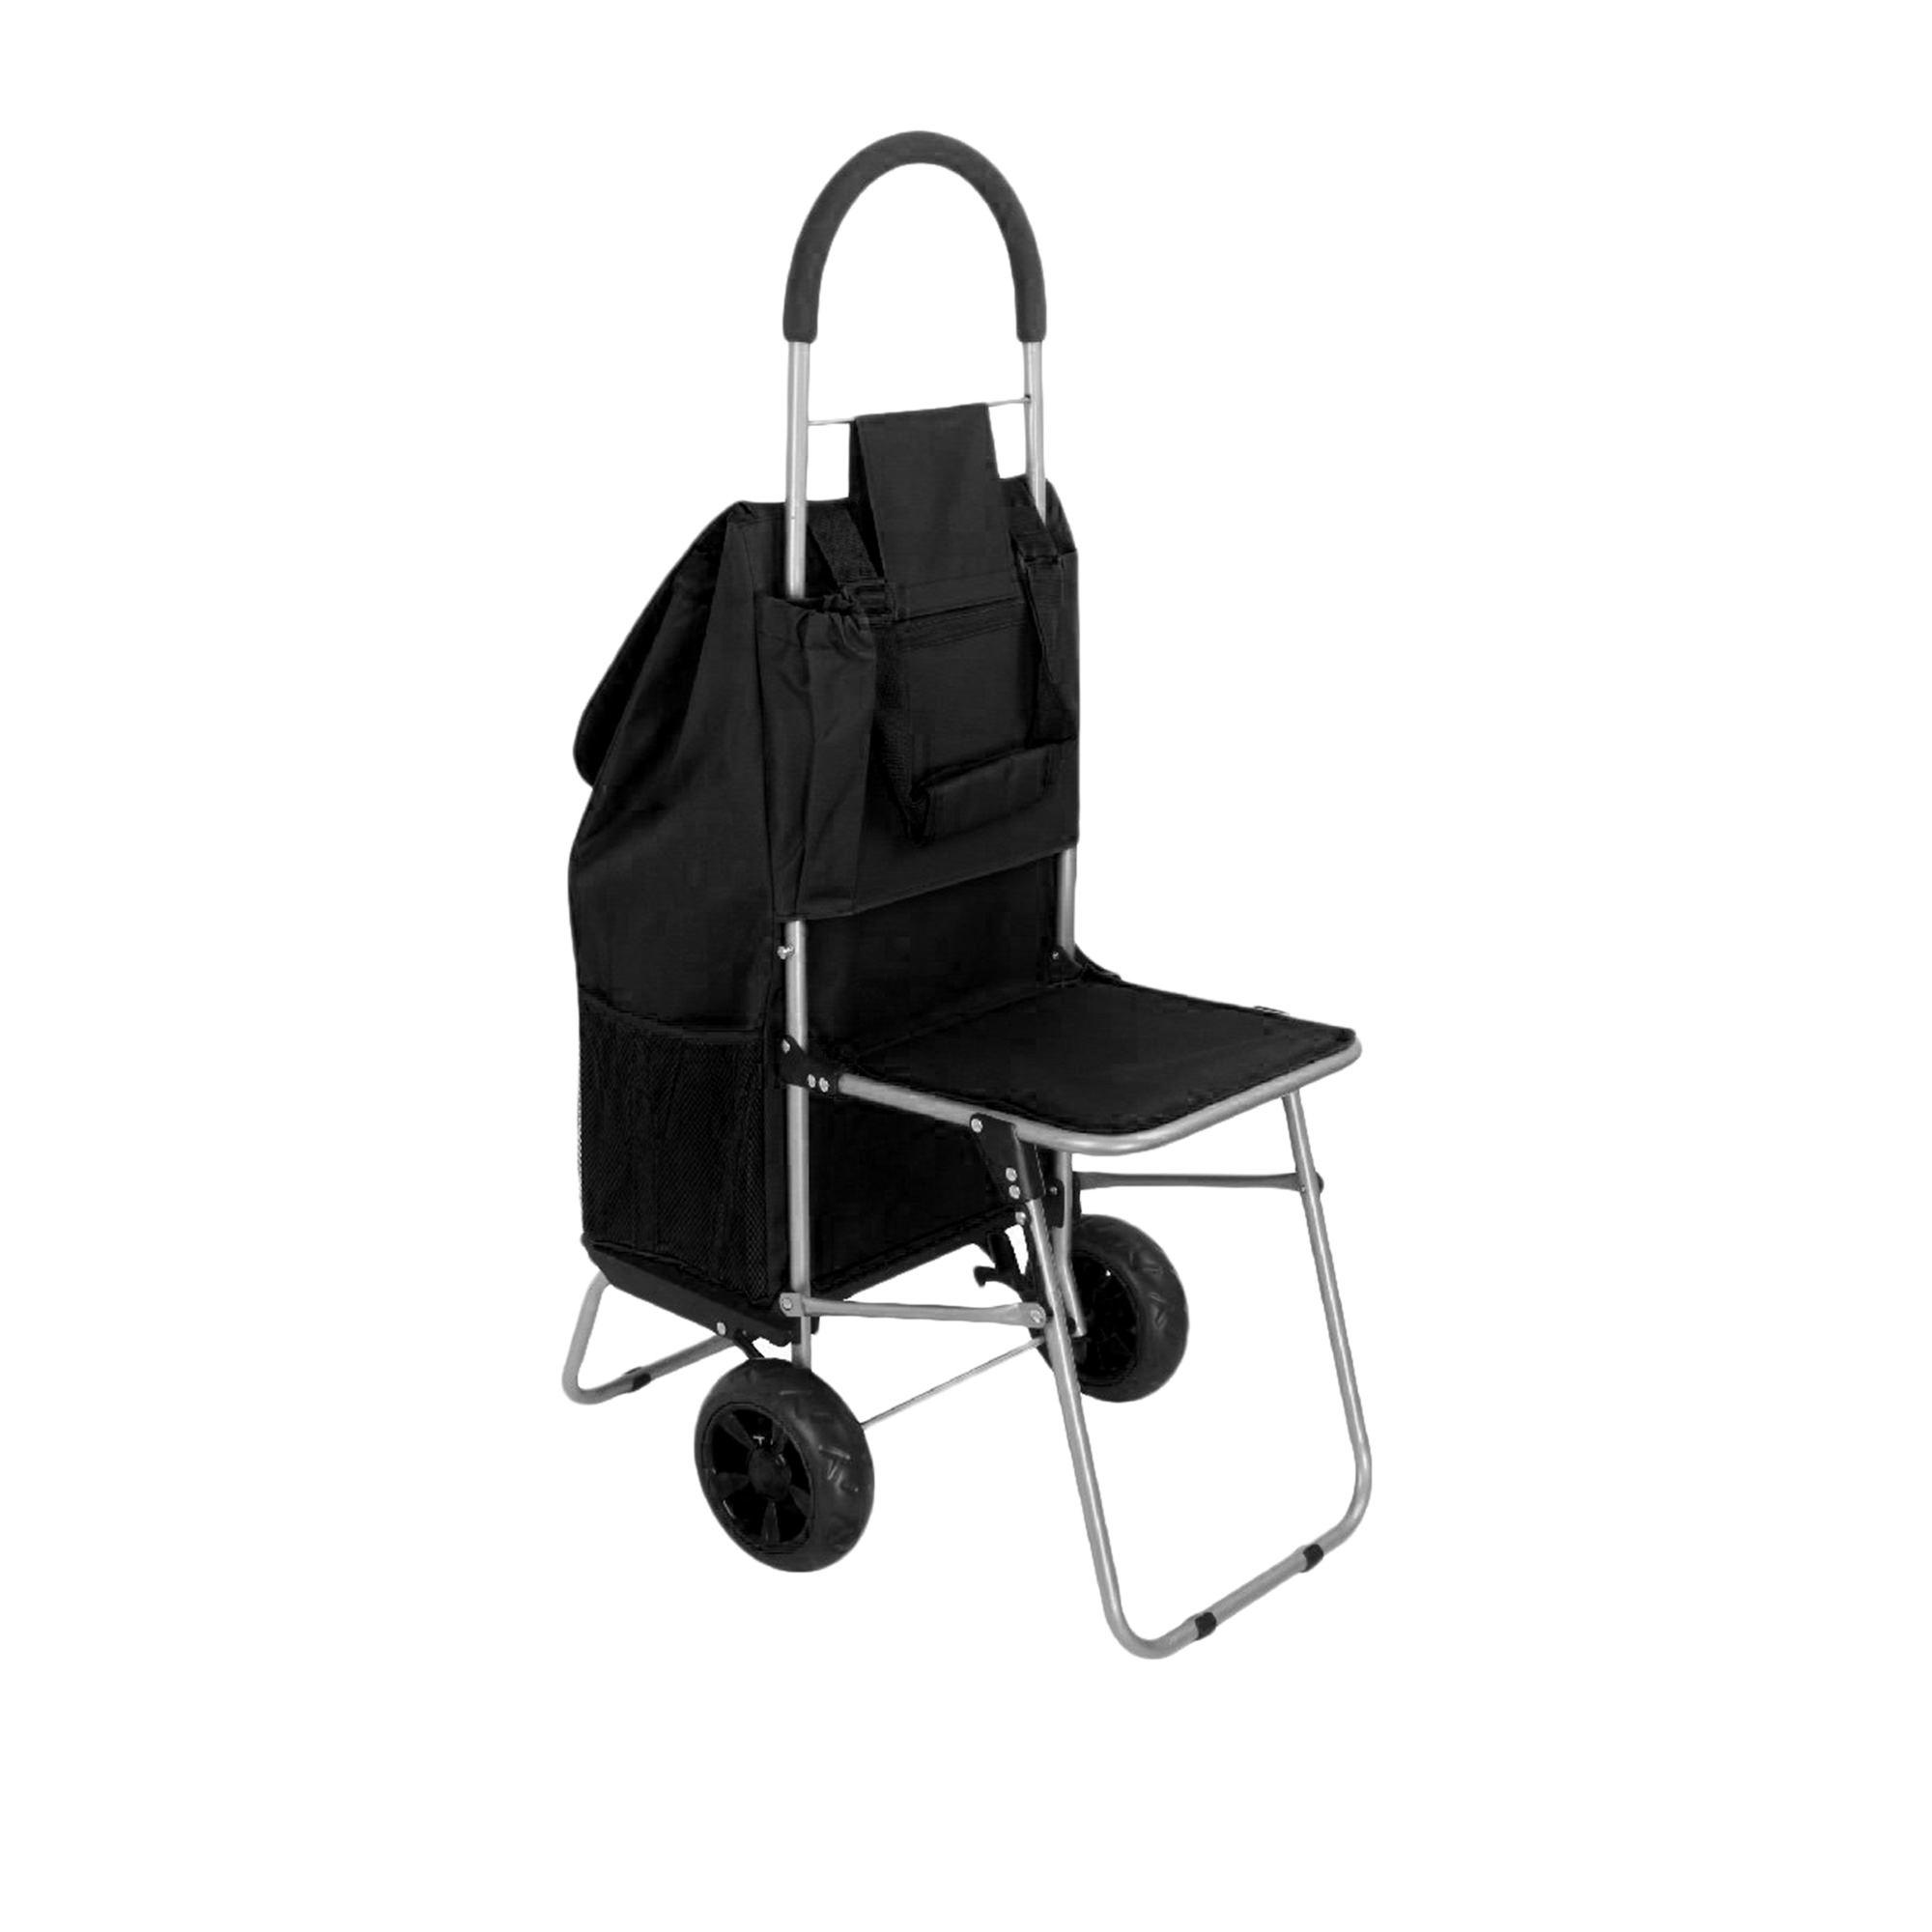 White Magic Handy Trolley with Seat Black Image 3